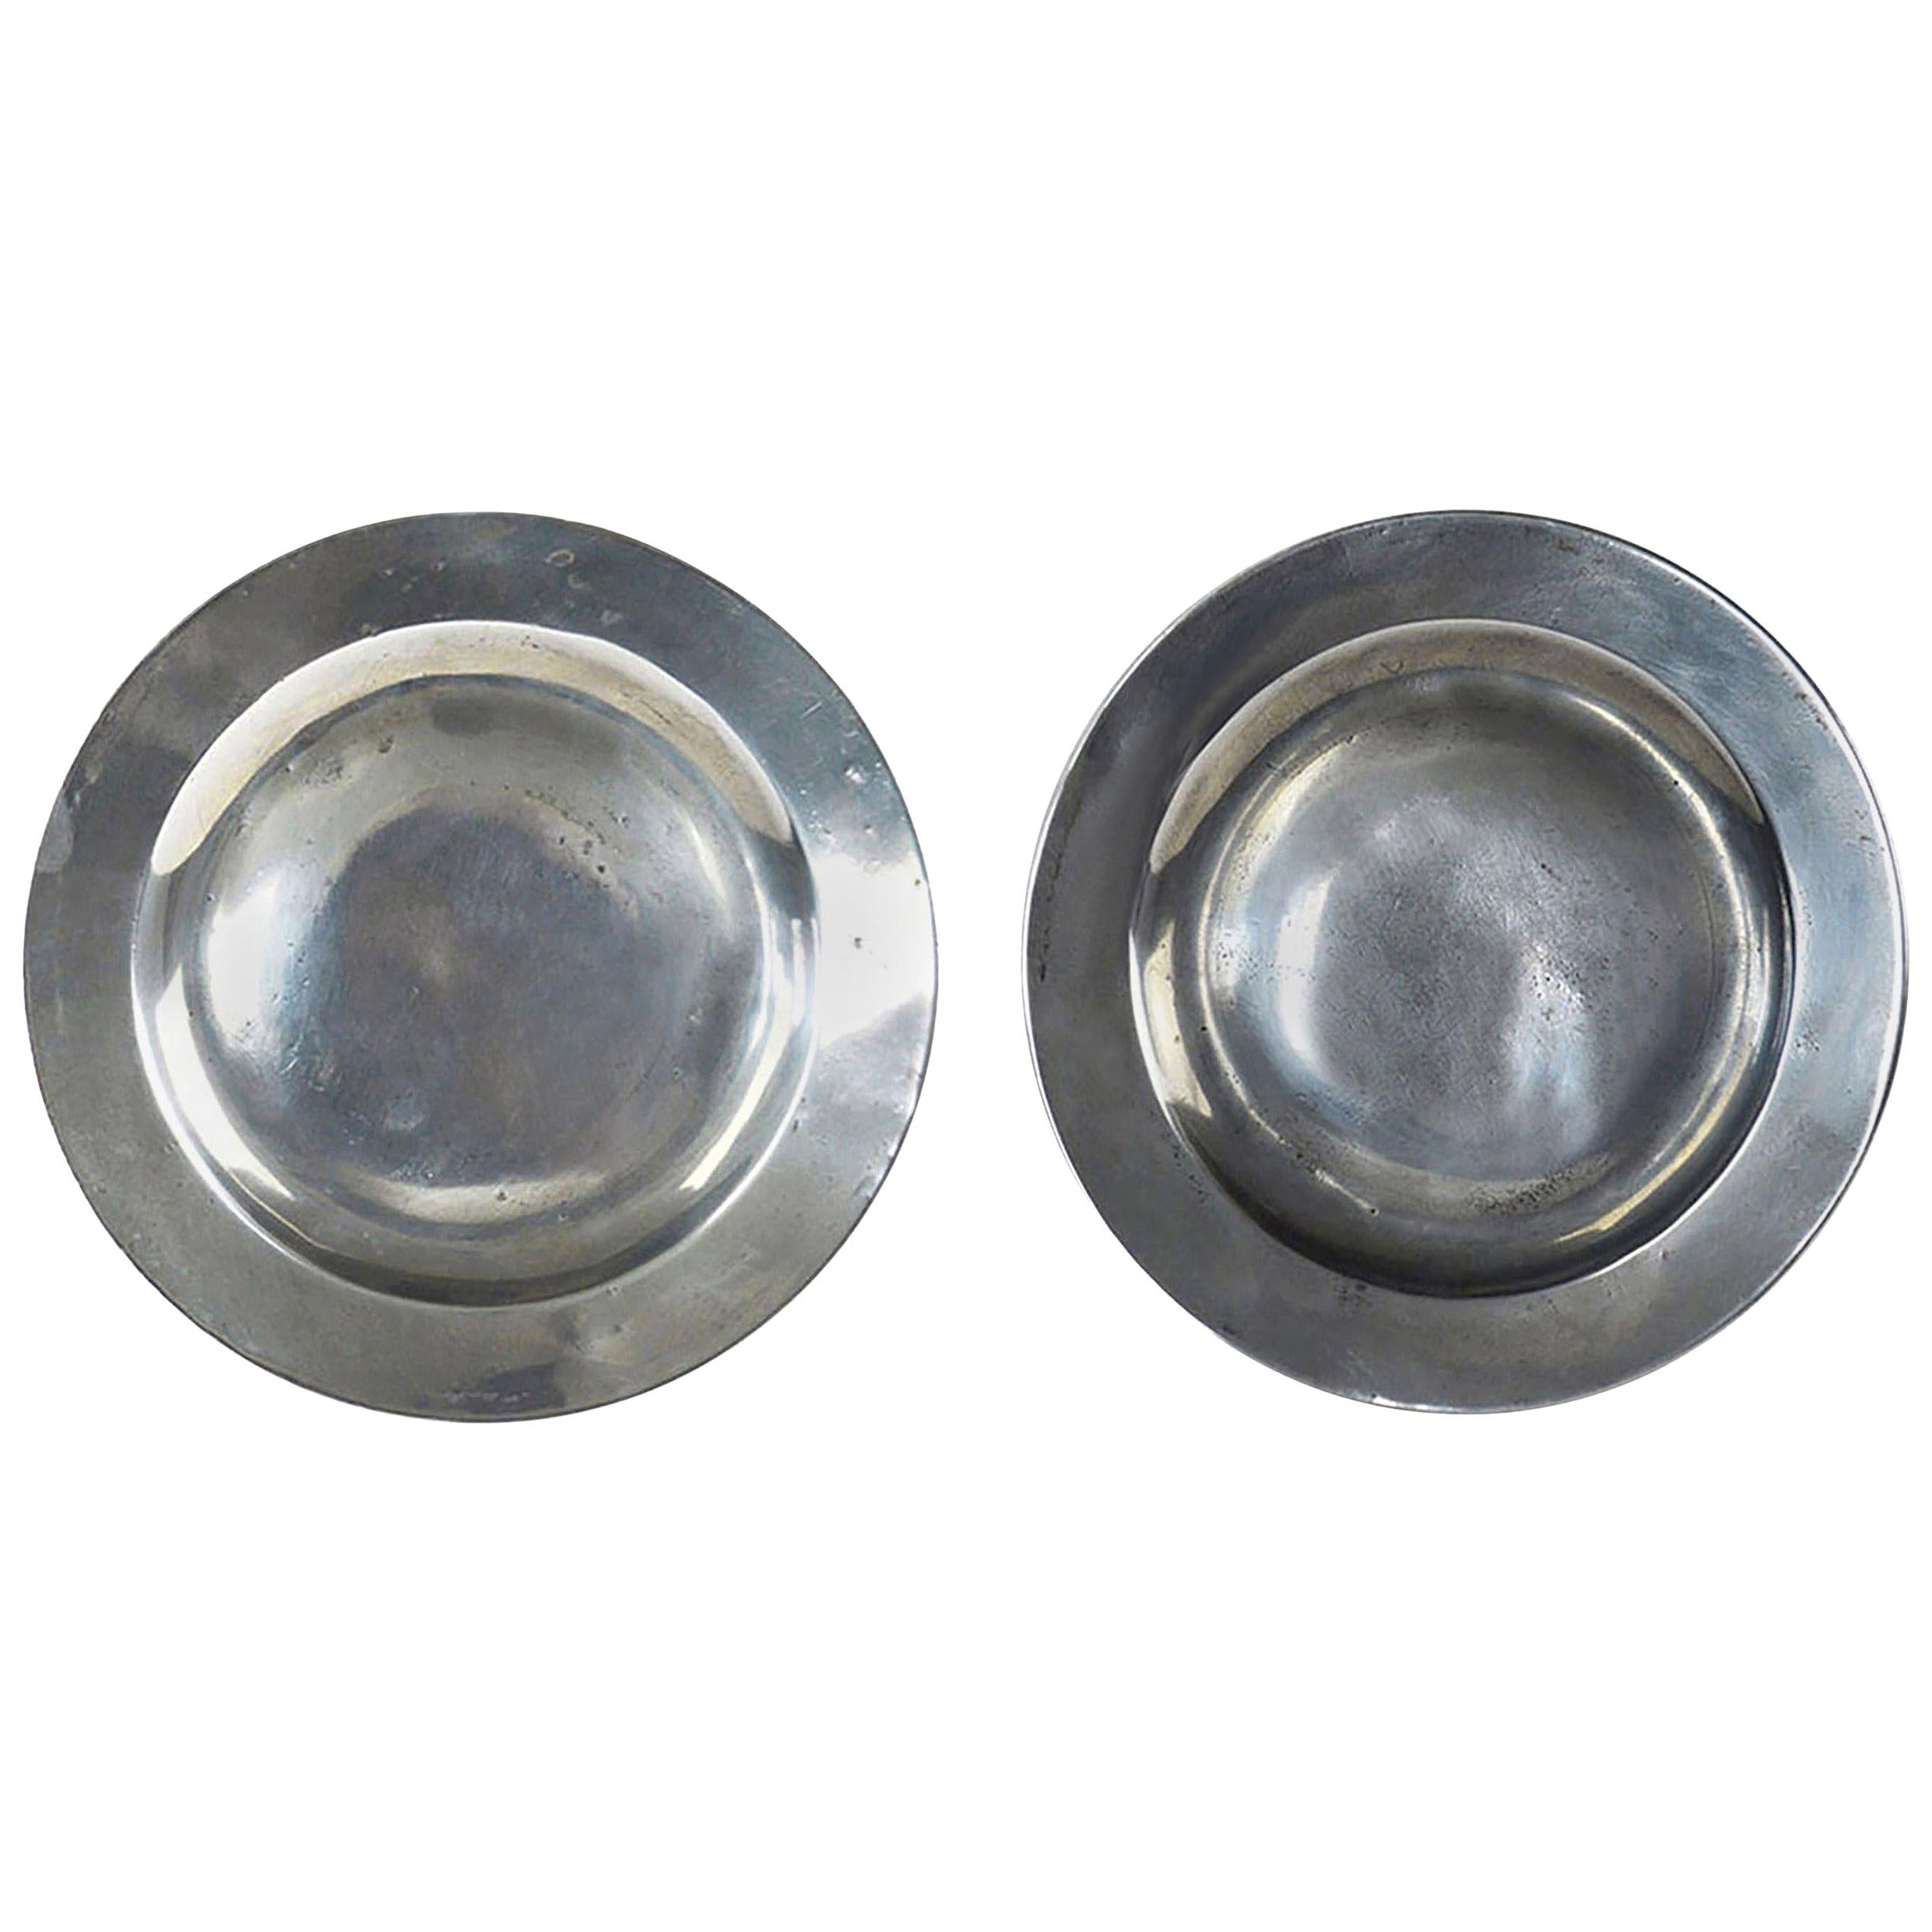 Pair of Antique Polished Pewter Plates, English, 18th Century